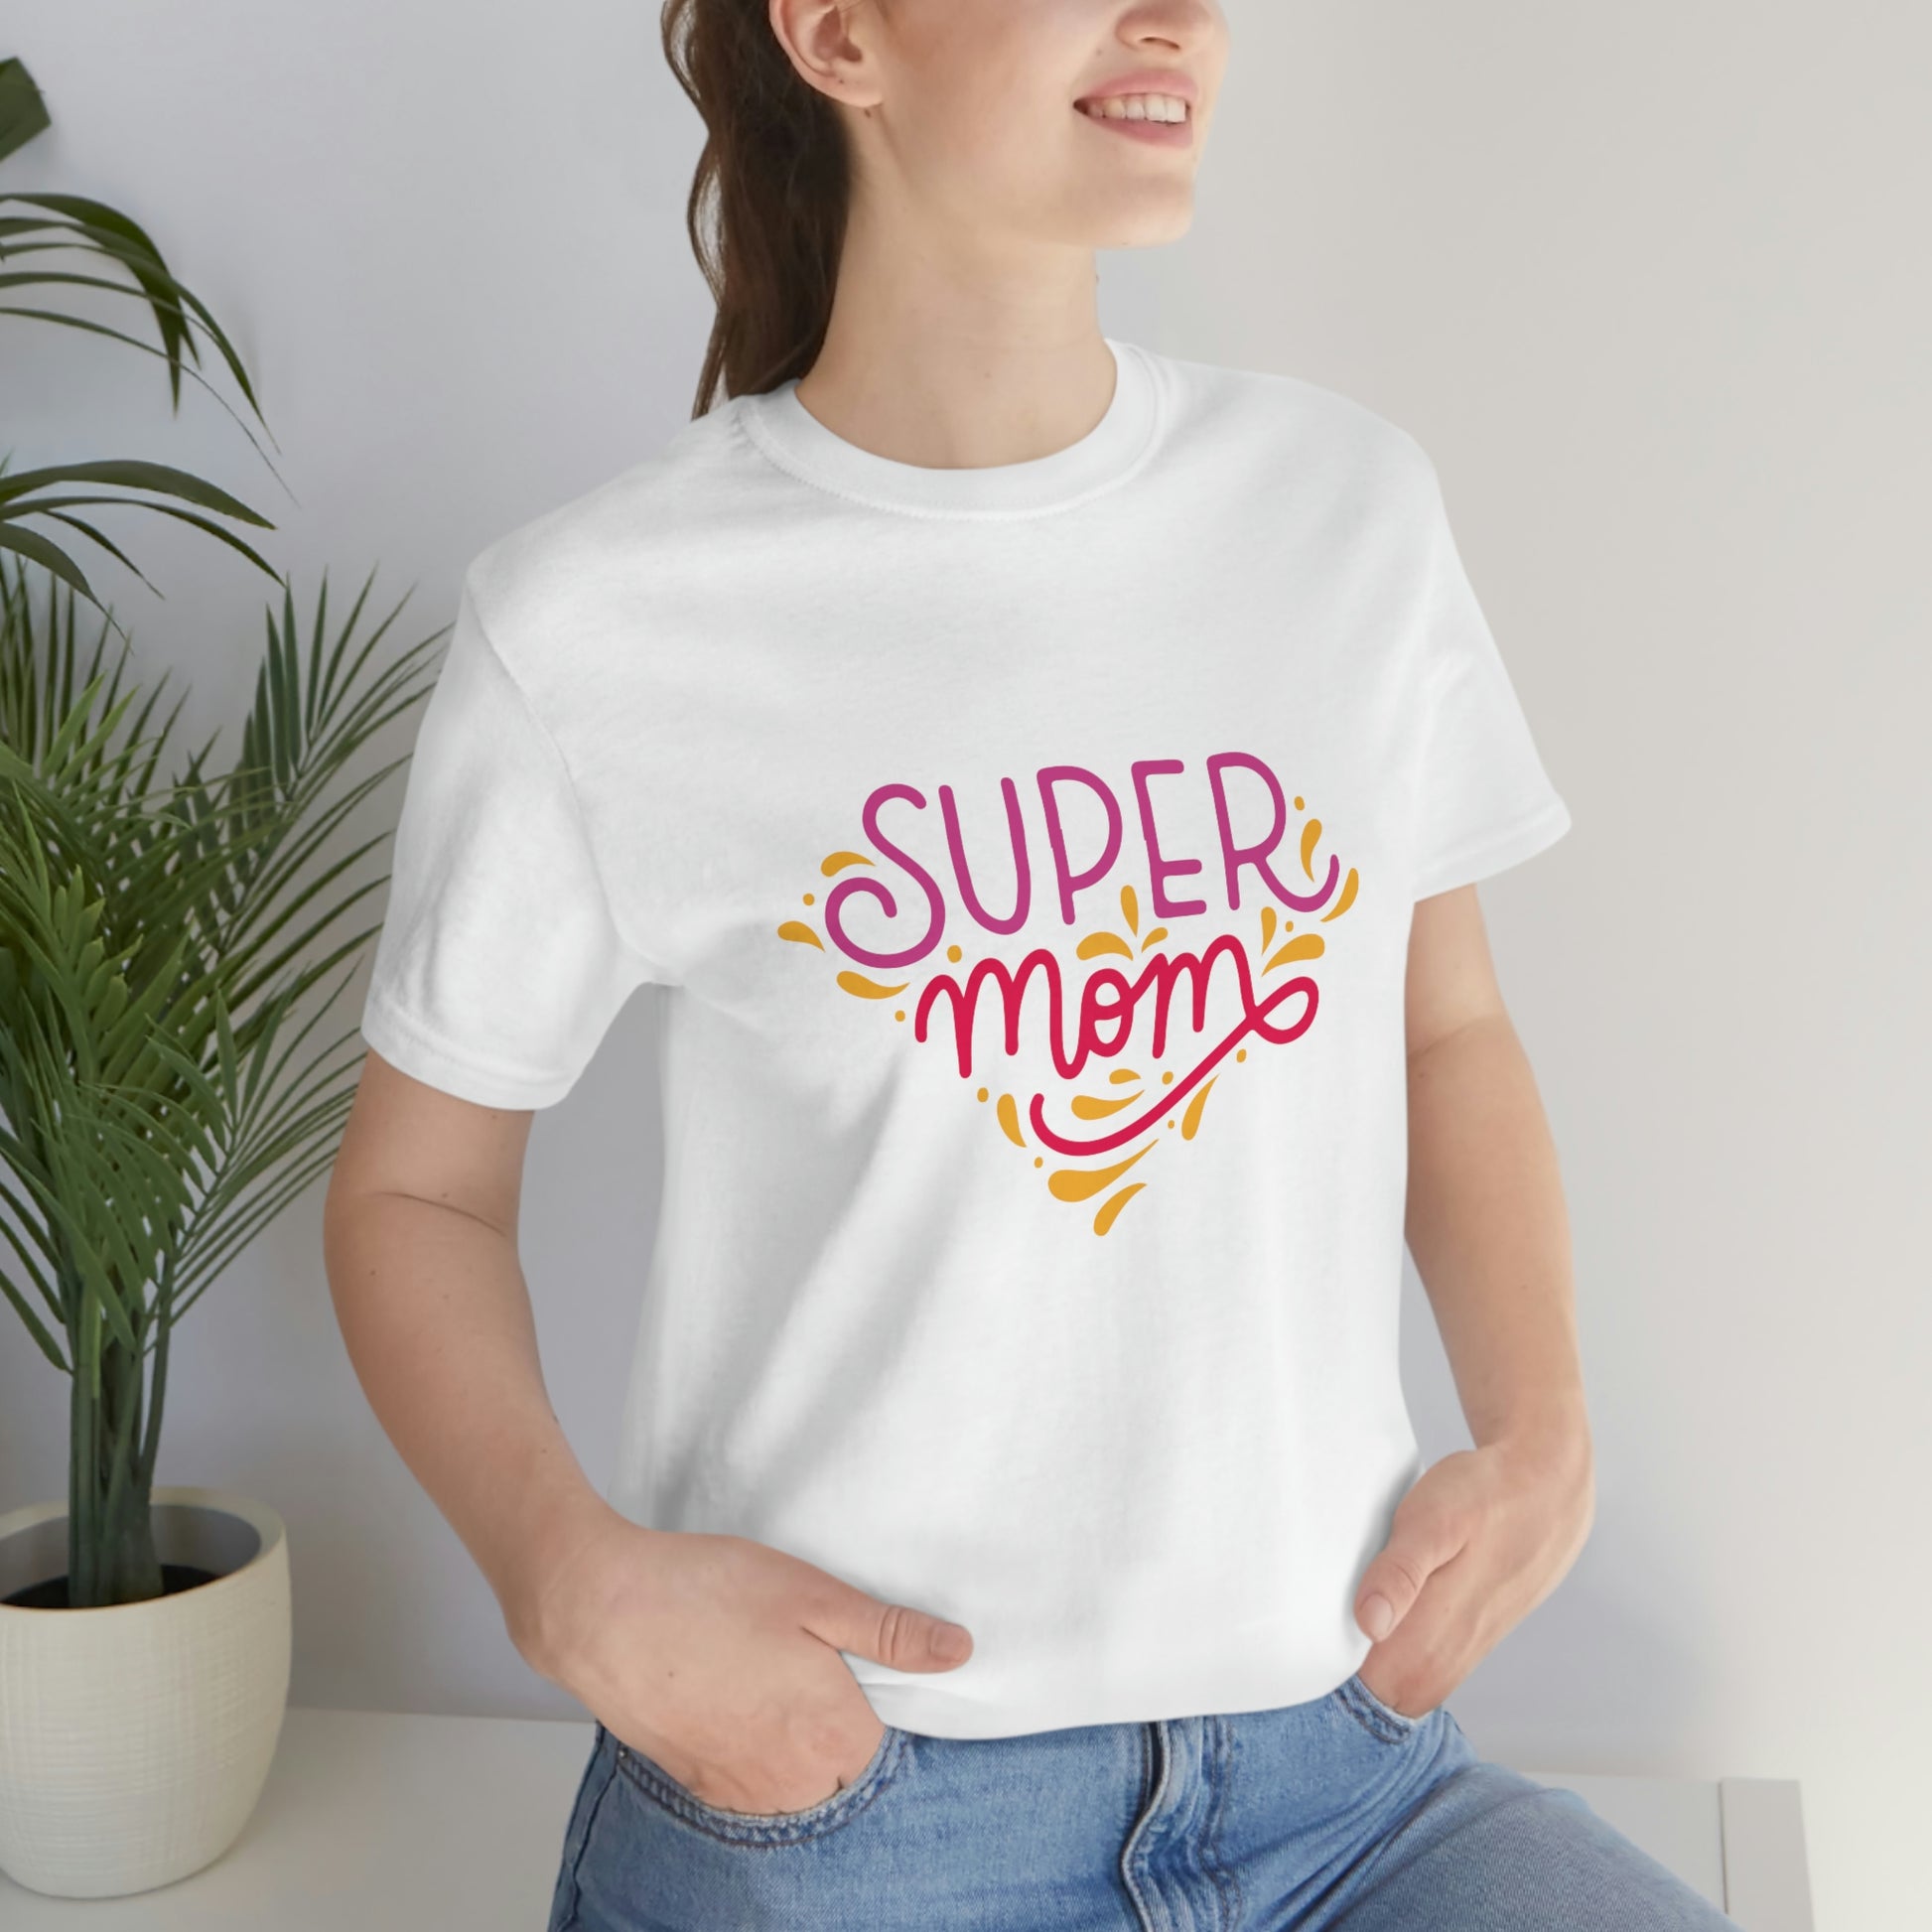 Super lovable design for the perfect Mothersday gift. Super mom white T-shirt is carefully crafted with high-quality materials, is both comfortable and durable, making it a versatile addition to any mom's wardrobe.